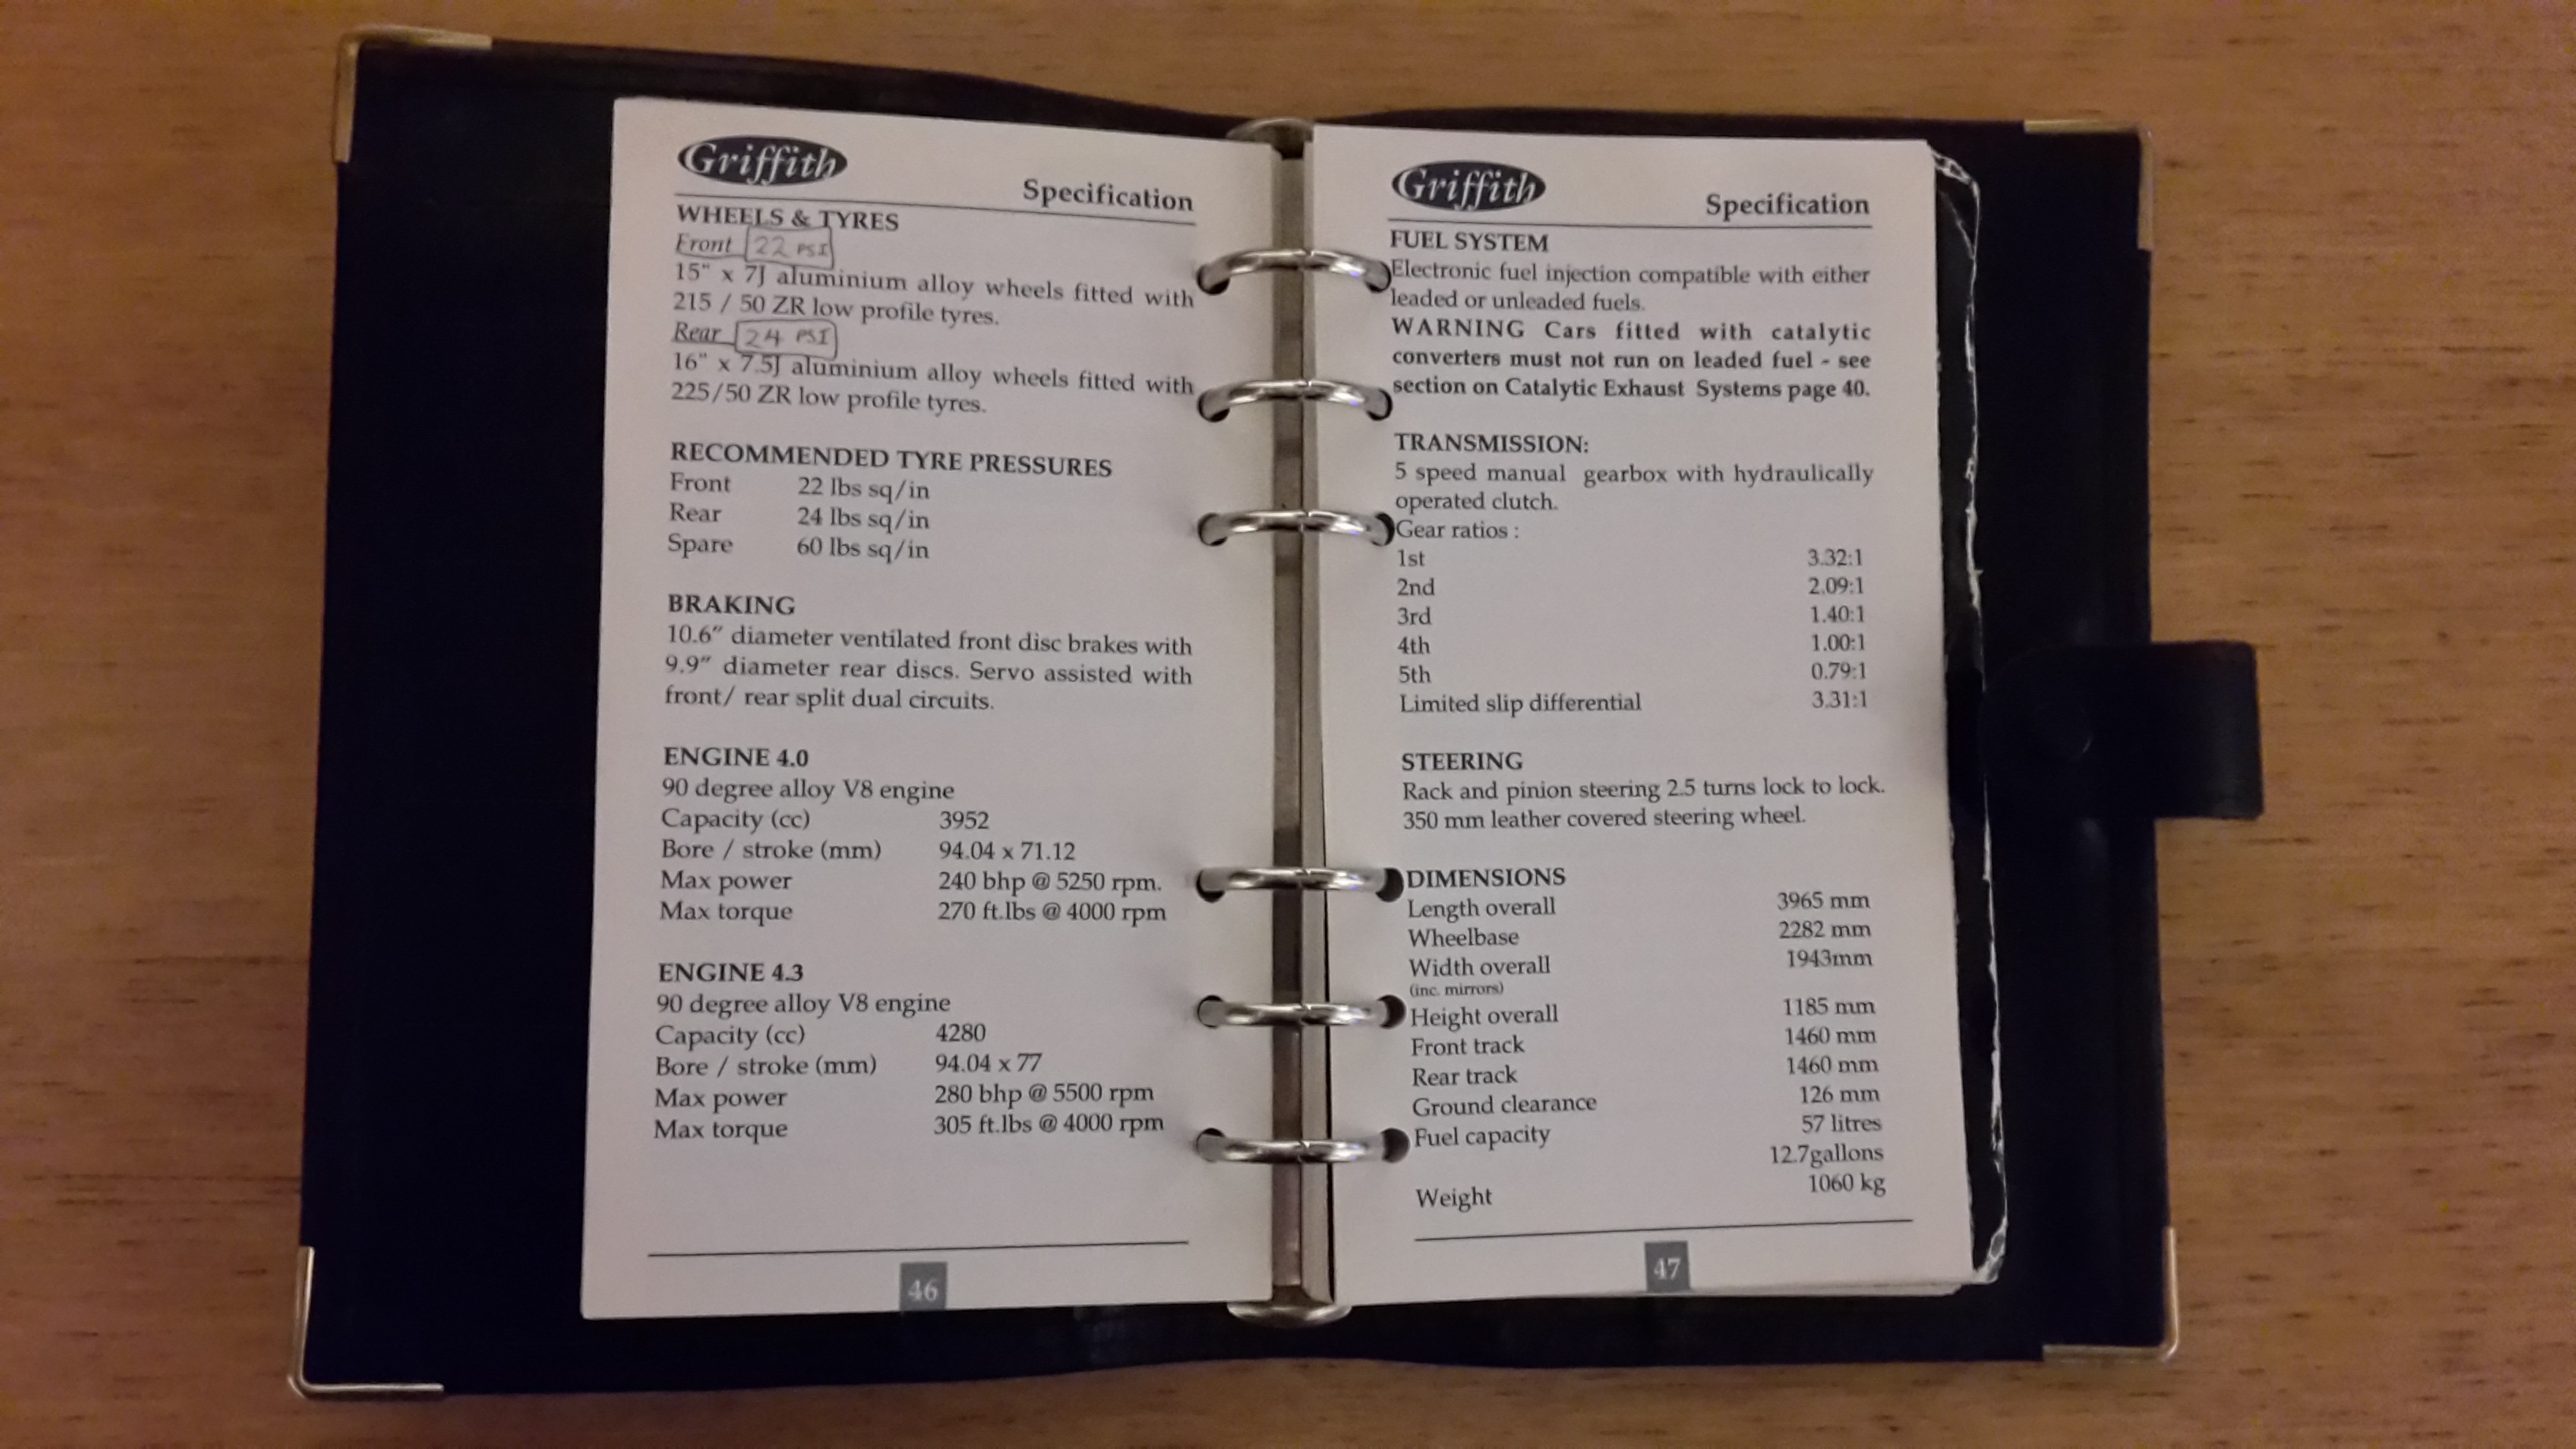 400 pre cat owners manual - Page 1 - Griffith - PistonHeads